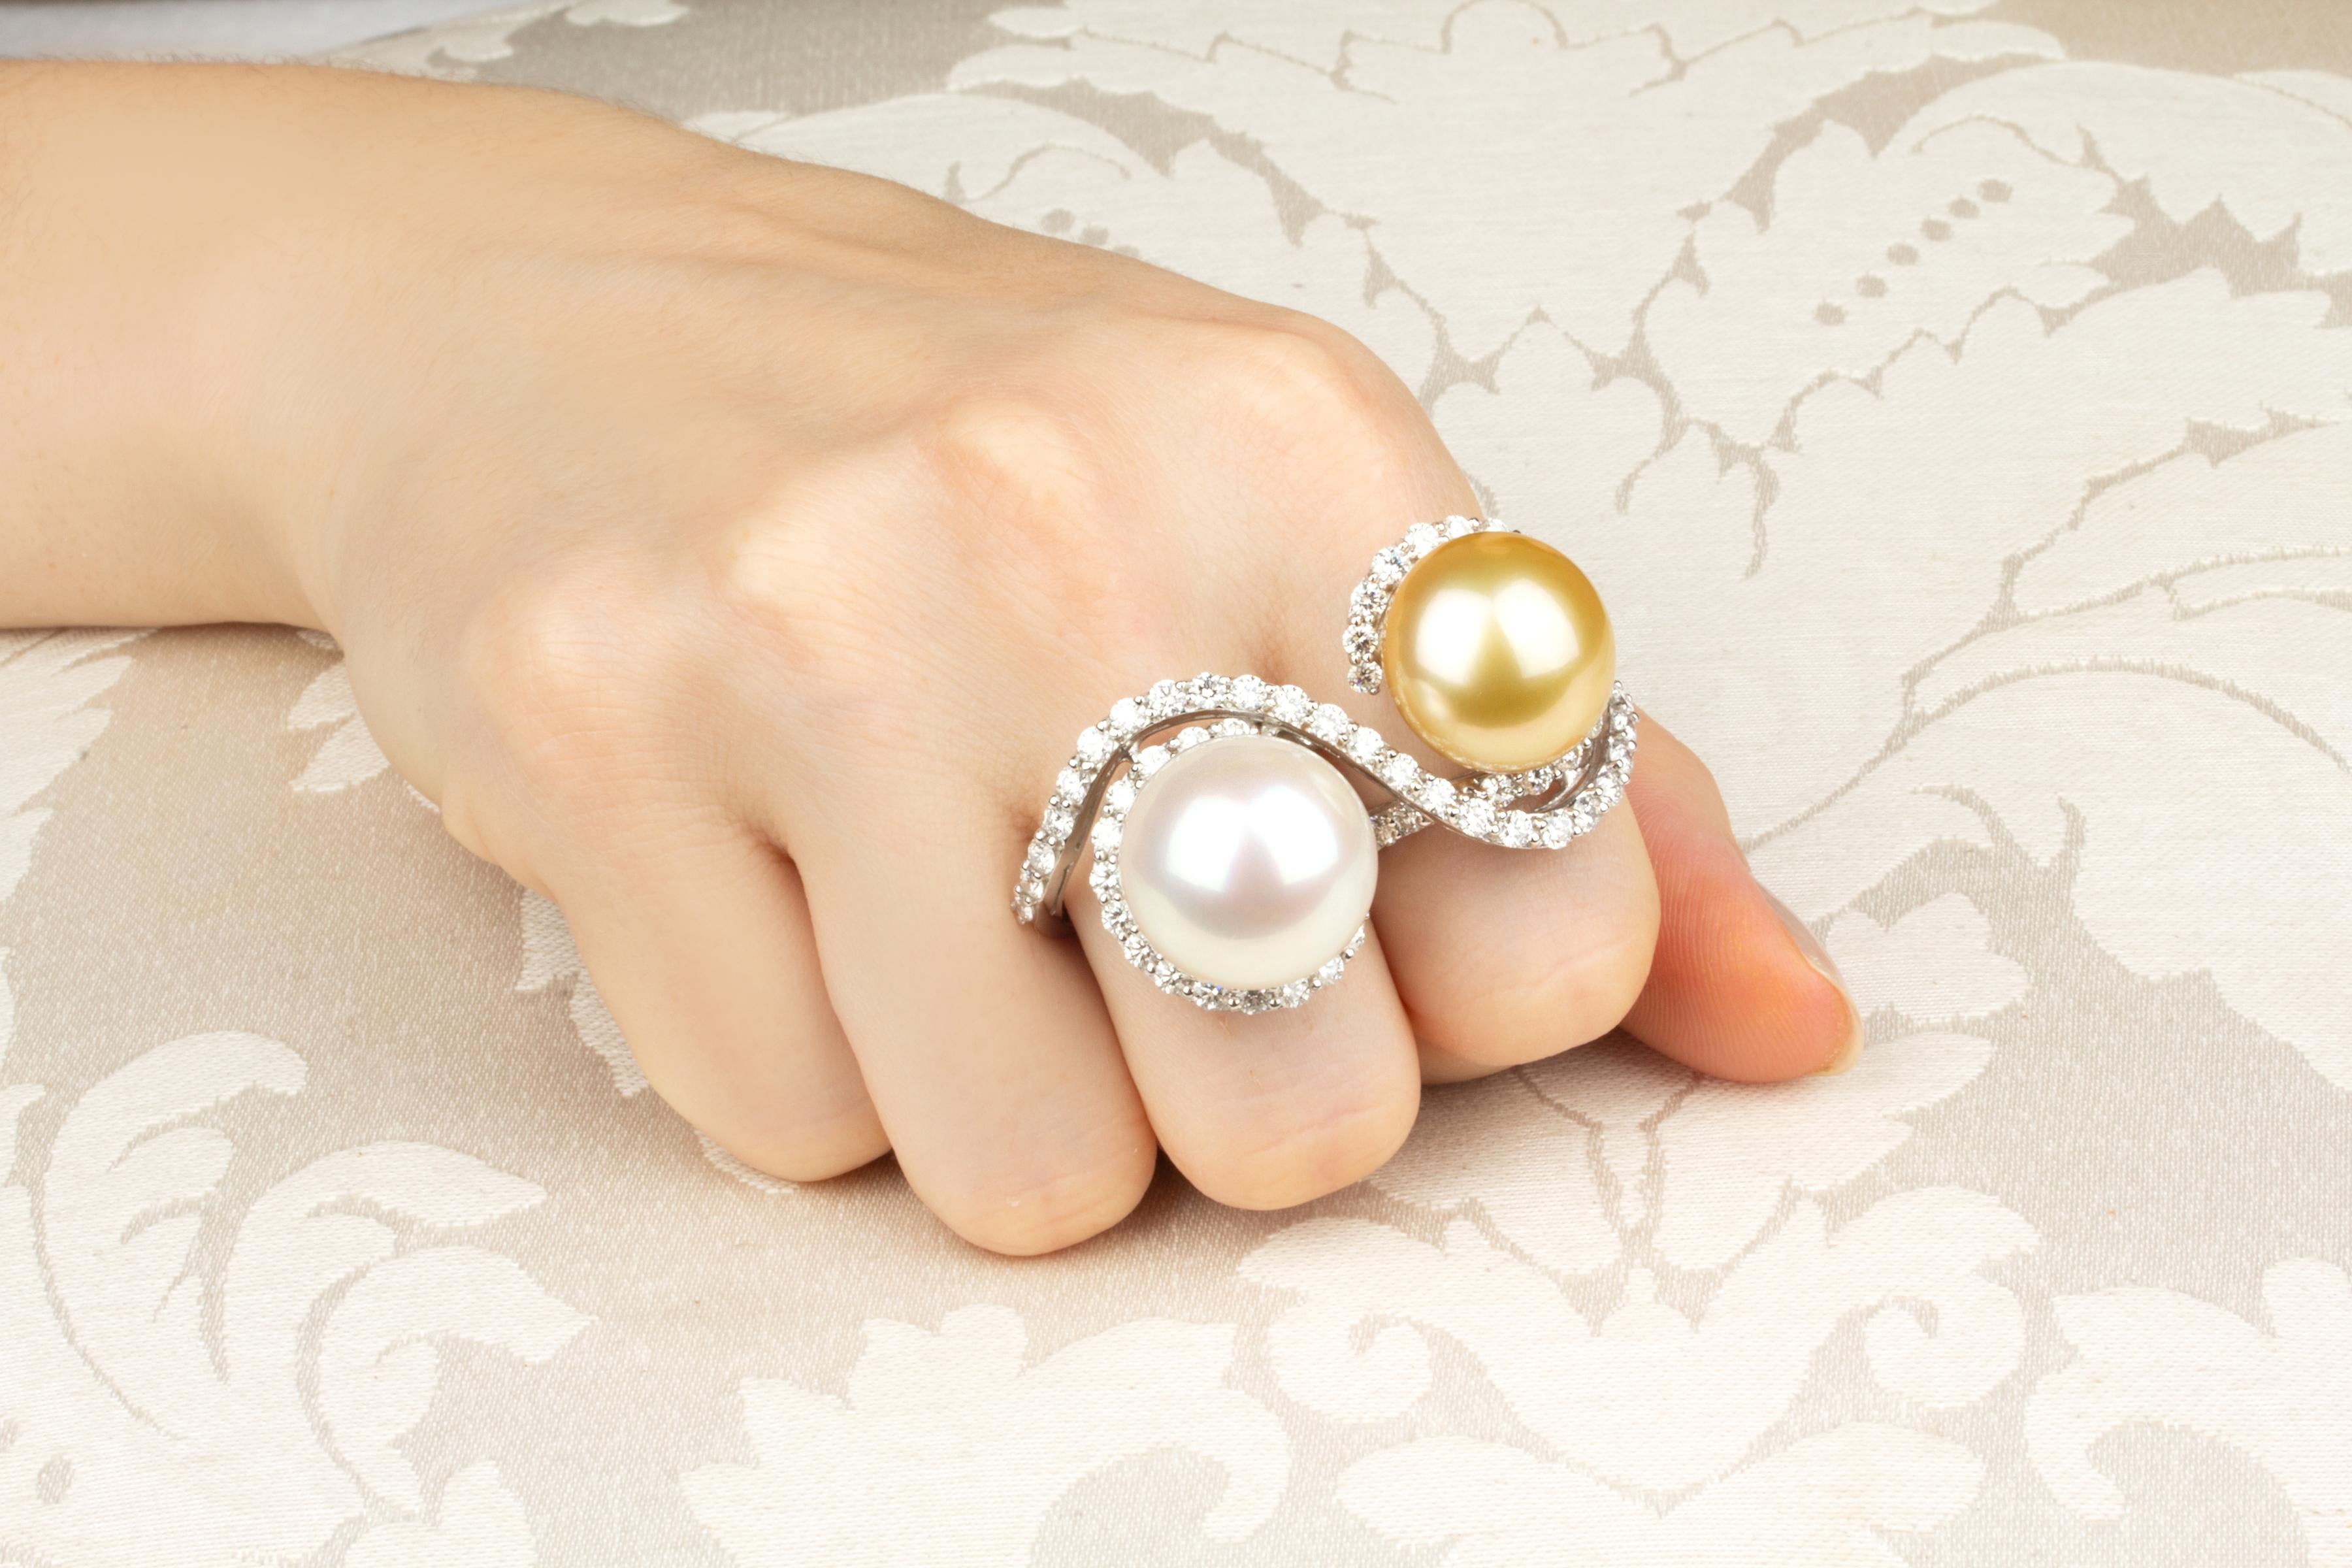 This two-finger pearl and diamond ring features a splendid Australian South Sea pearl and an equally splendid golden pearl, both of 17mm diameter. The untreated pearls display a fine quality nacre and their natural color and luster have not been